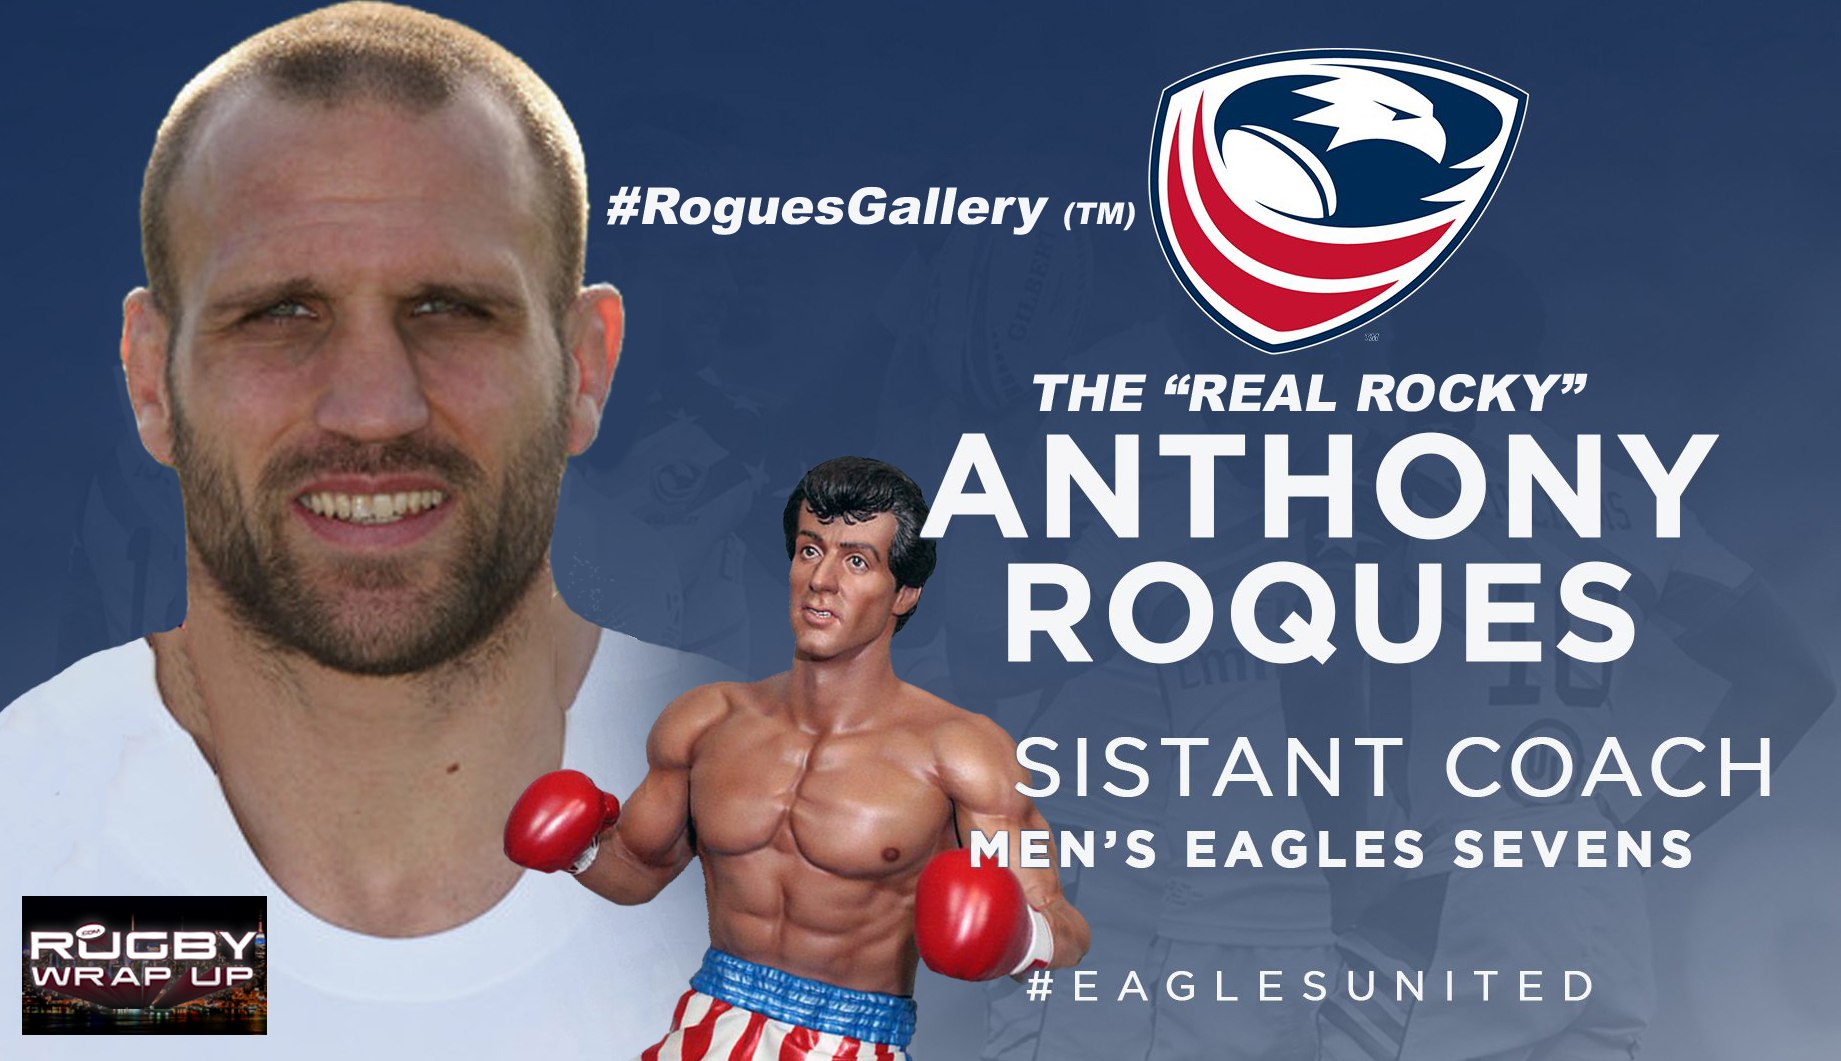 Anthony Rogues, Rocky, USA_Rugby, Rugby_Wrap_Up